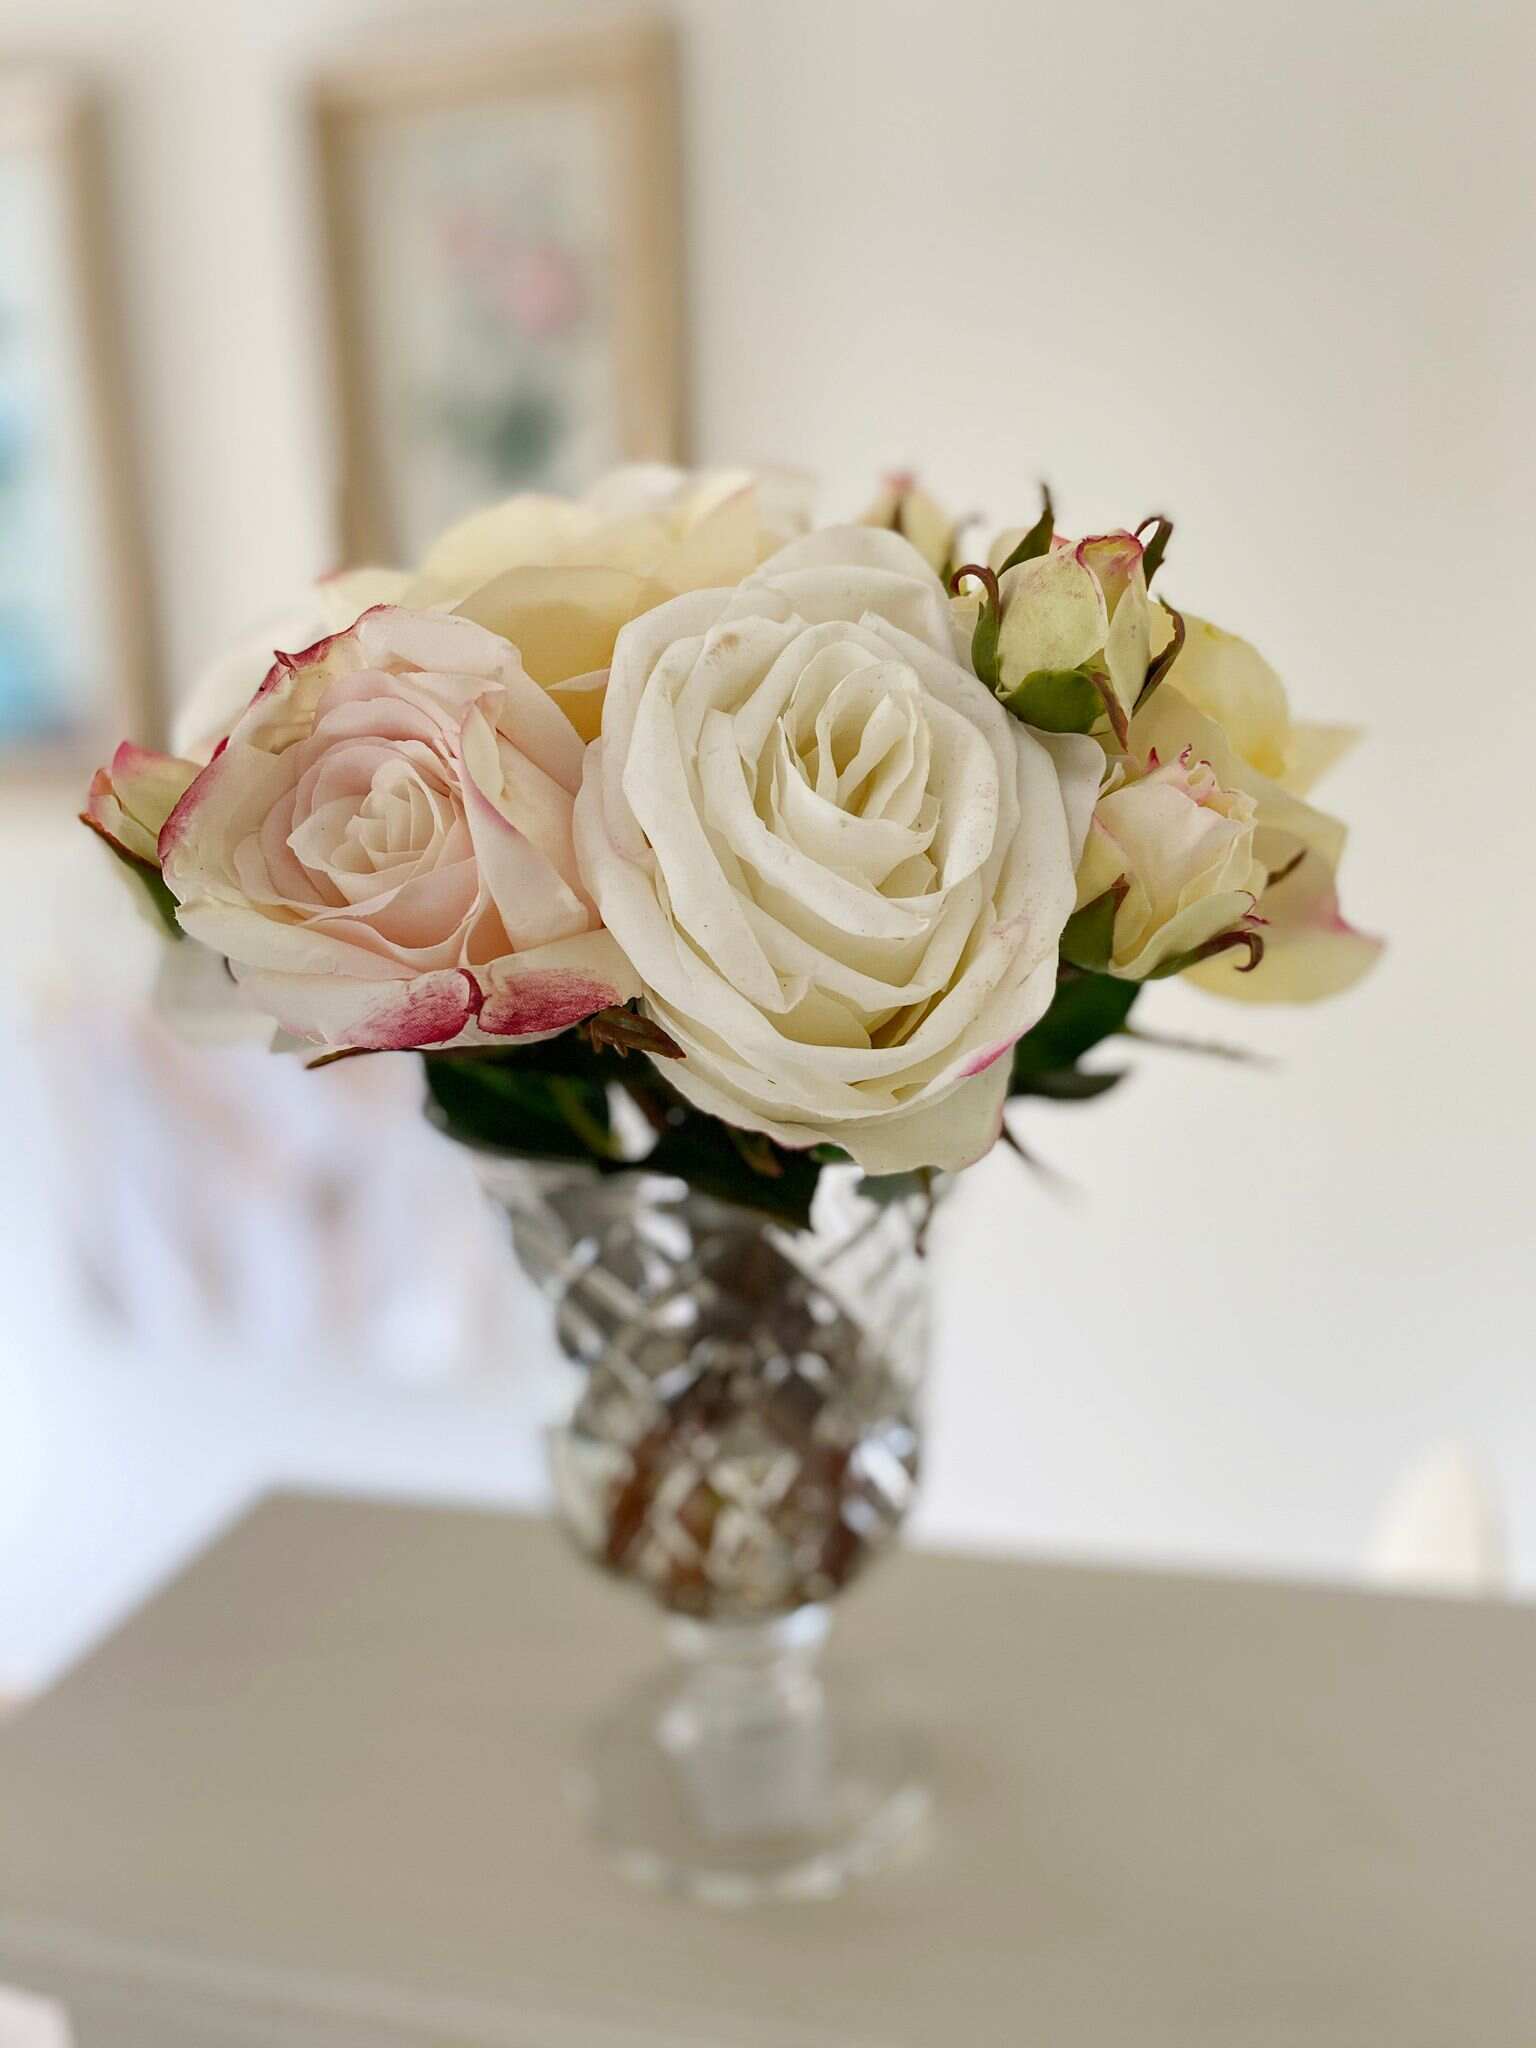 White artificial roses in cut glass vase on table